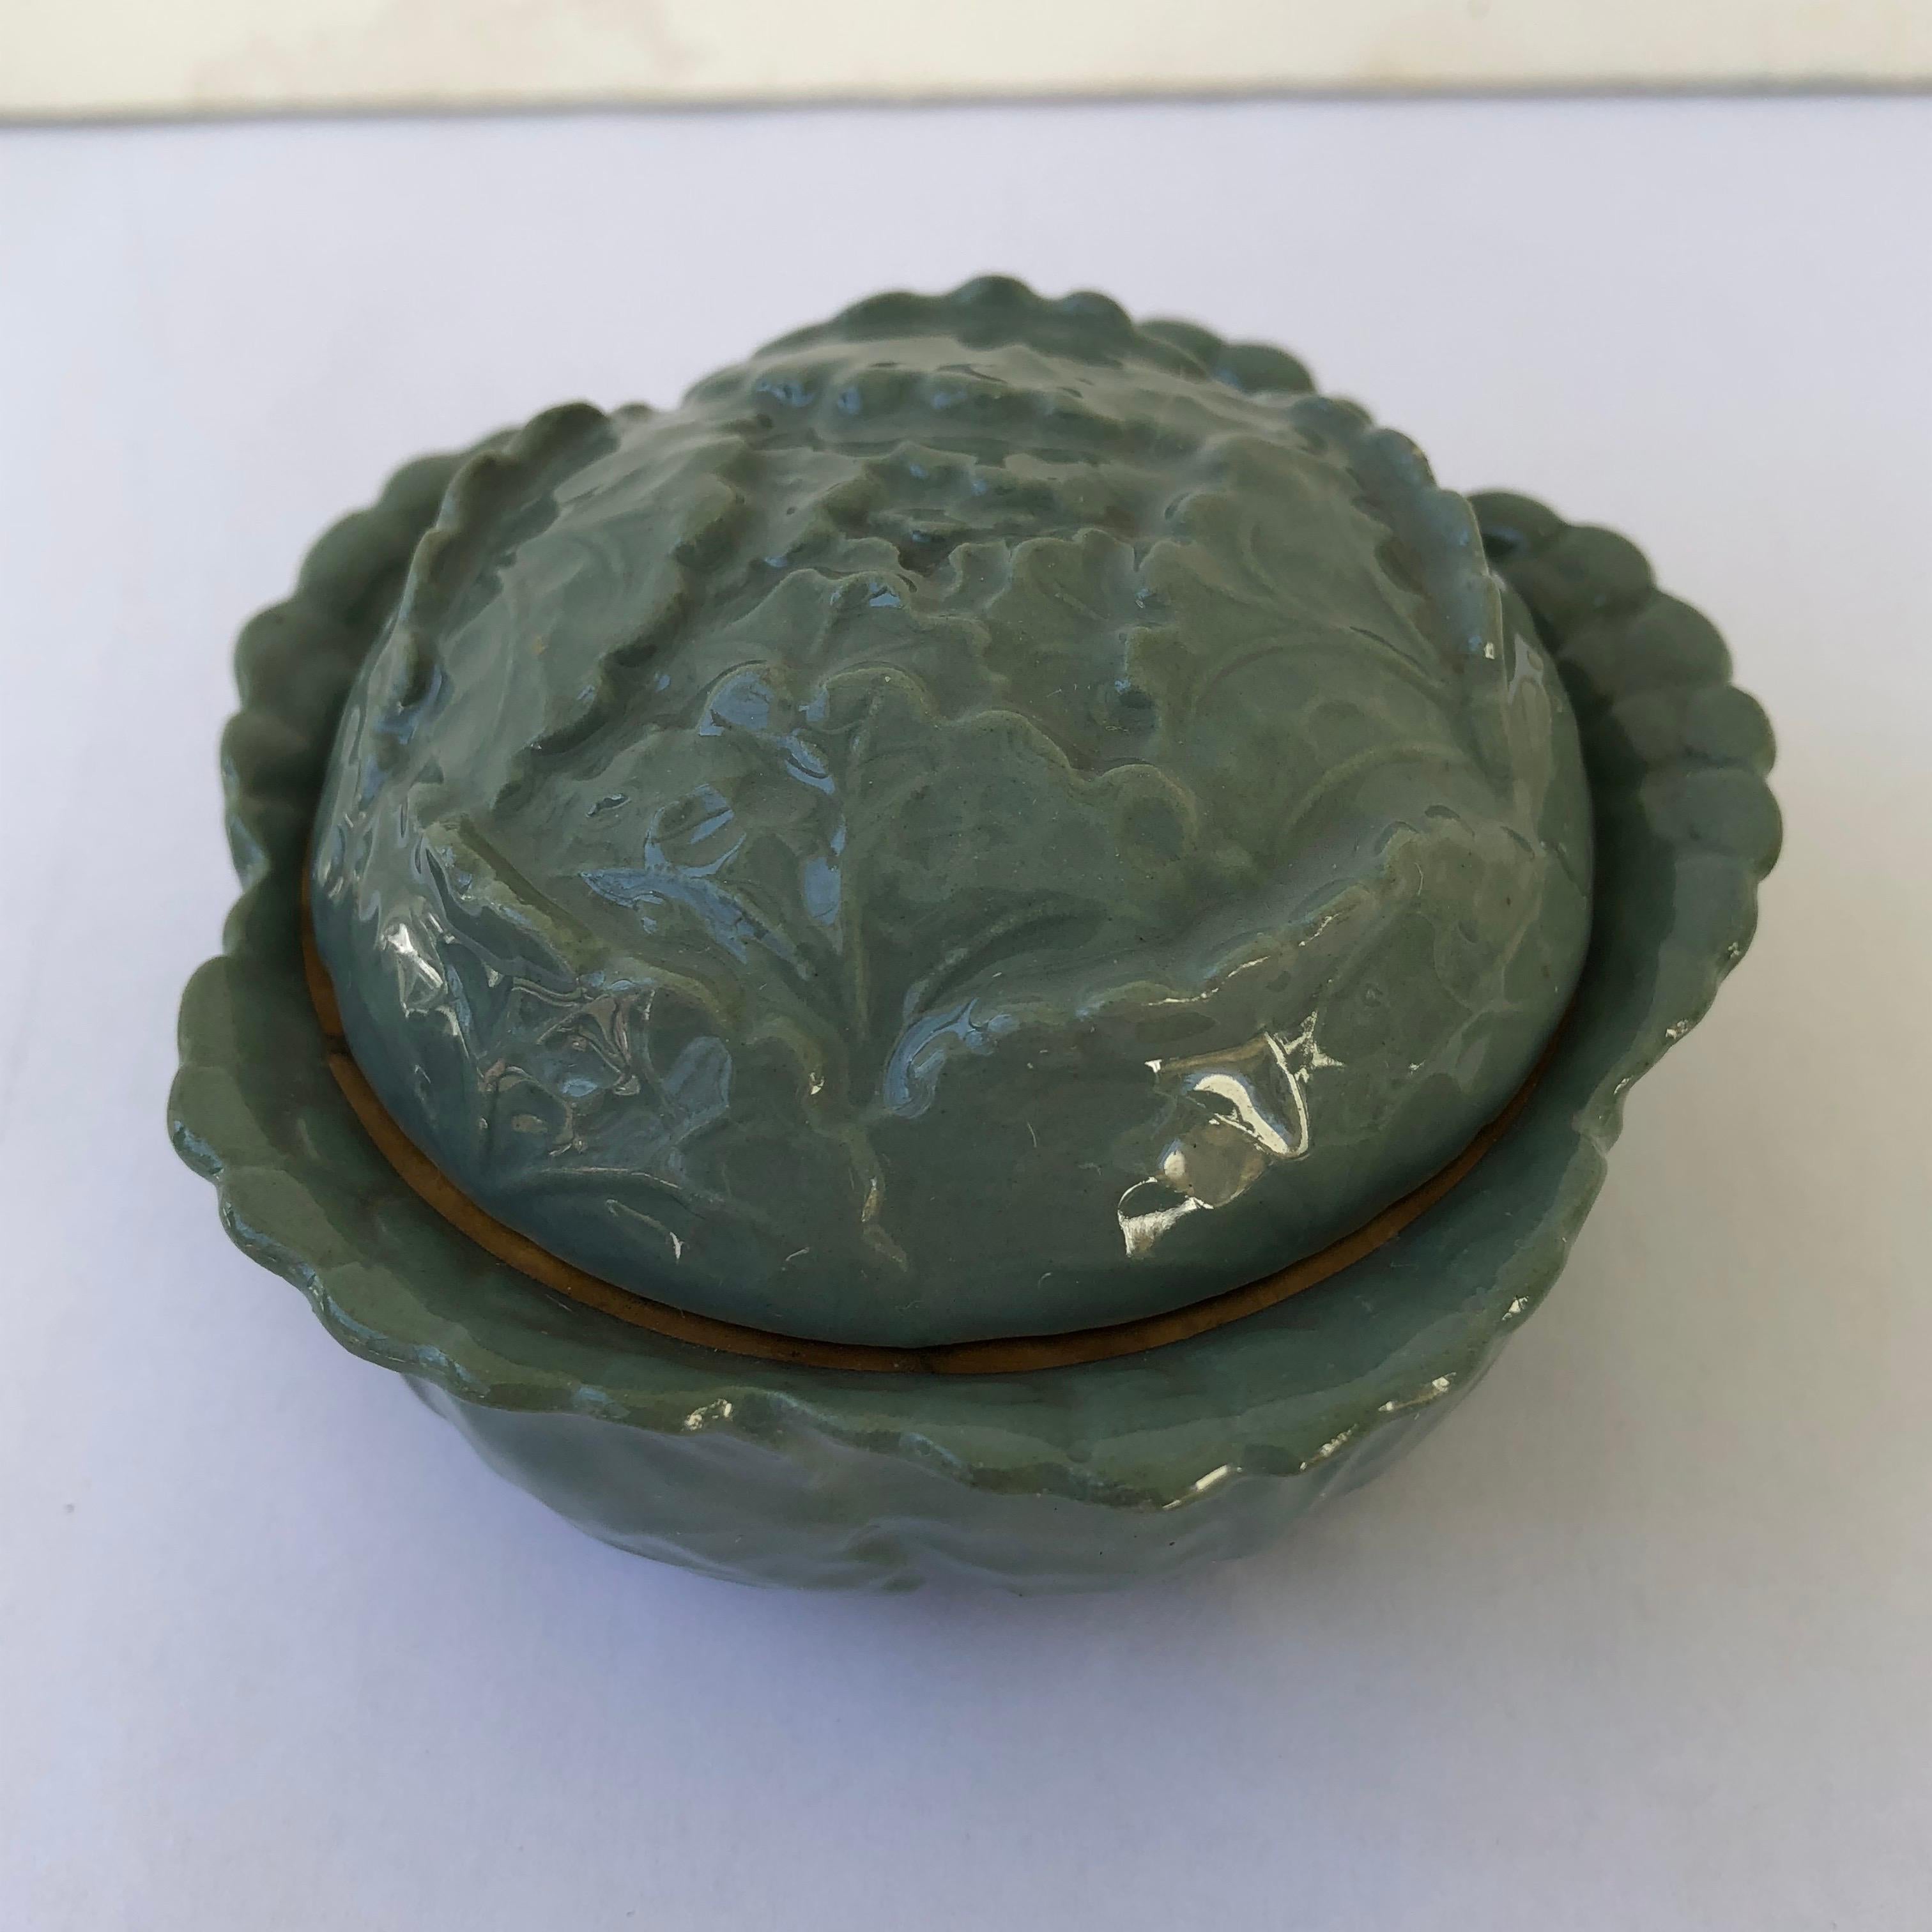 Pretty dusty green hand painted cabbage form Limoges porcelain lidded jewelry or pin box. Interior edge rimmed in gold.